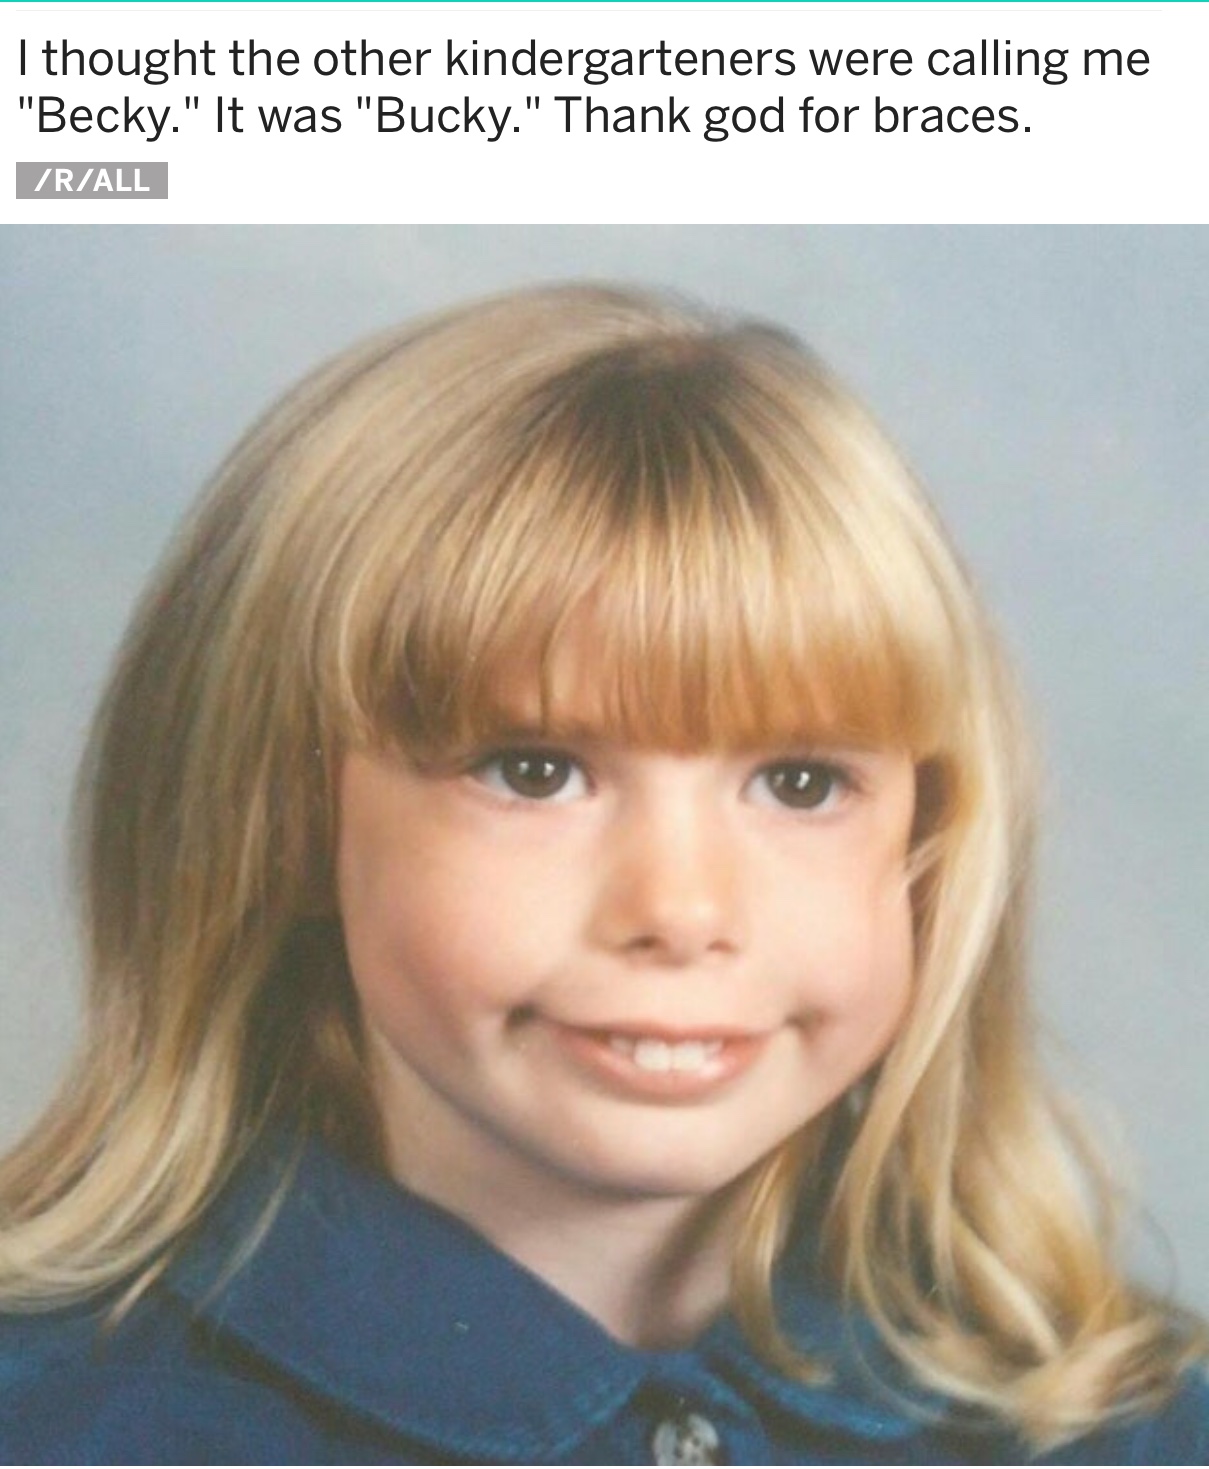 People Share Photos From Their Most Awkward Years-PART 2